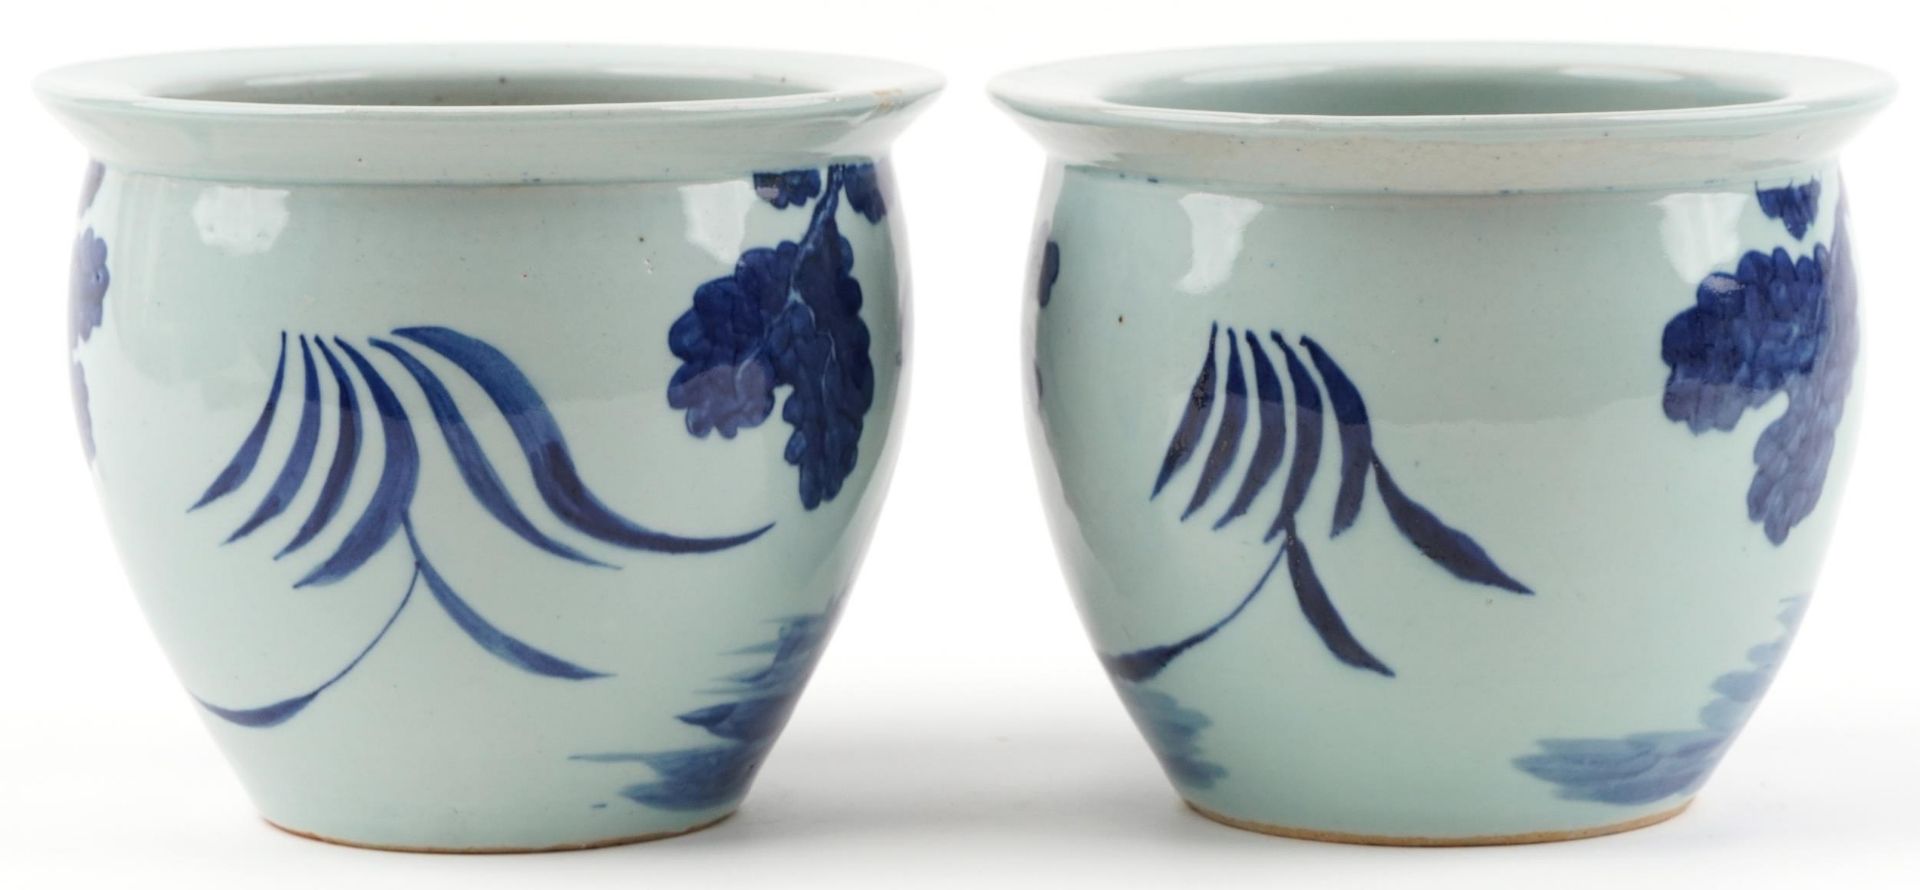 Pair of Chinese blue and white porcelain jardinieres painted with children playing in a palace - Image 3 of 6